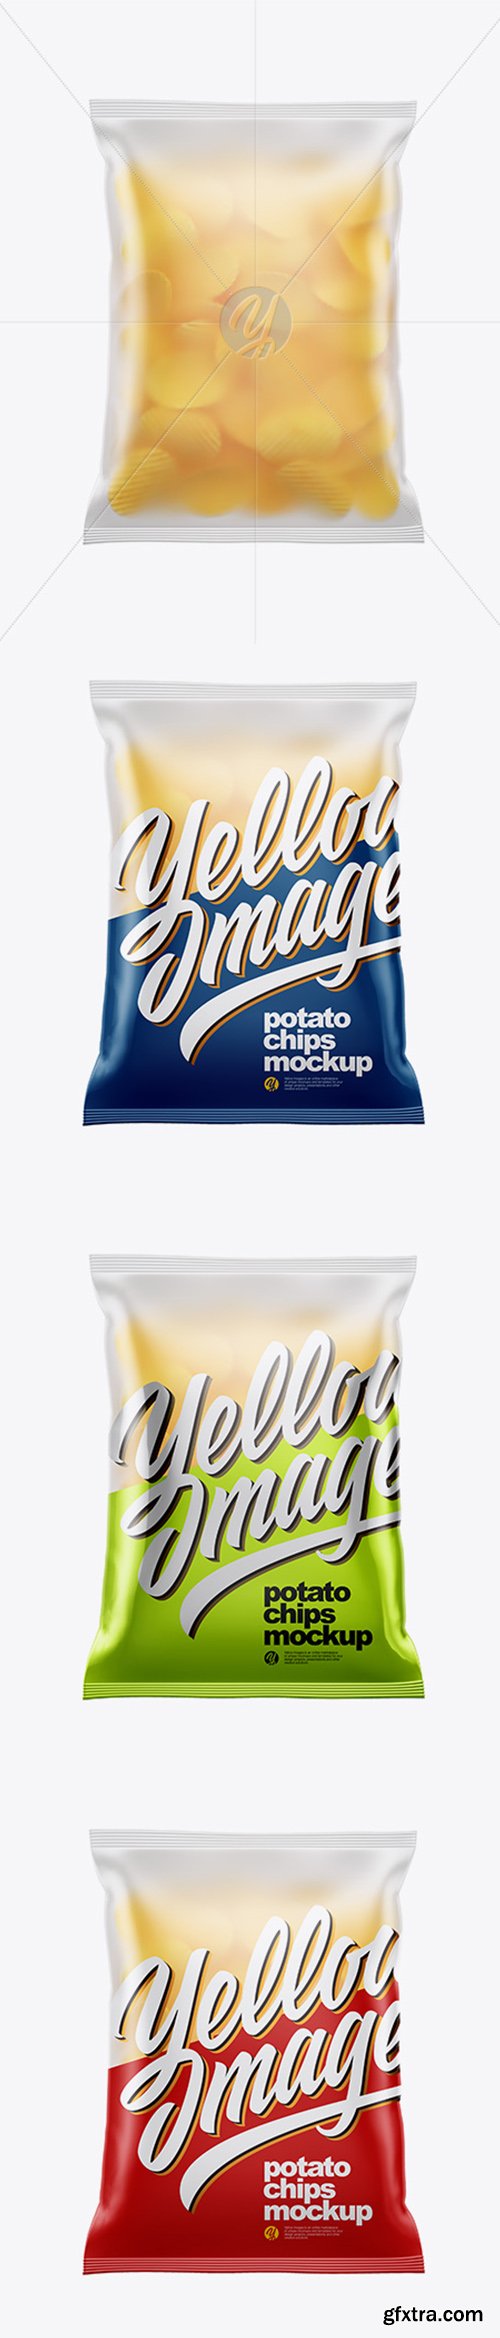 Frosted Bag With Corrugated Potato Chips Mockup 38548